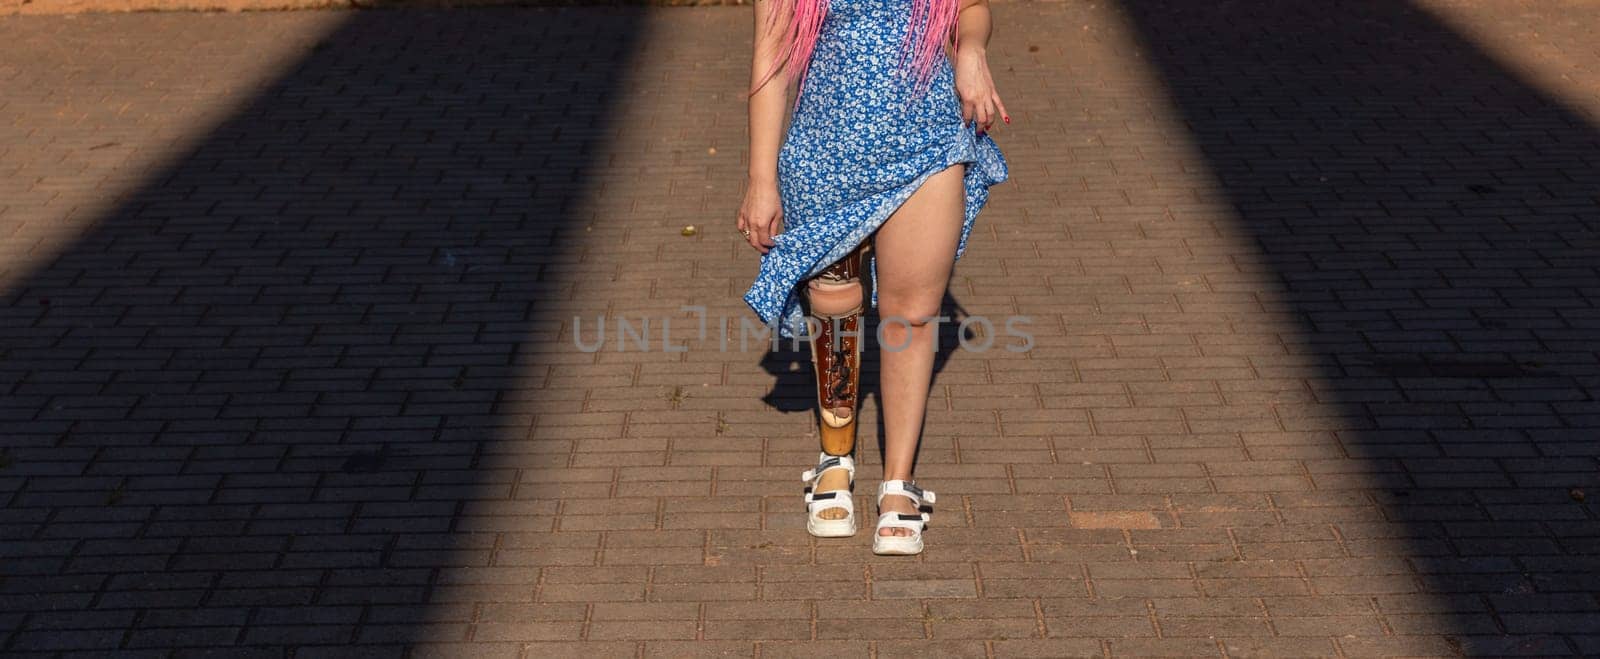 Beautiful young woman leg amputee in a dress walking in park at sunny day. Life goes on no matter what.